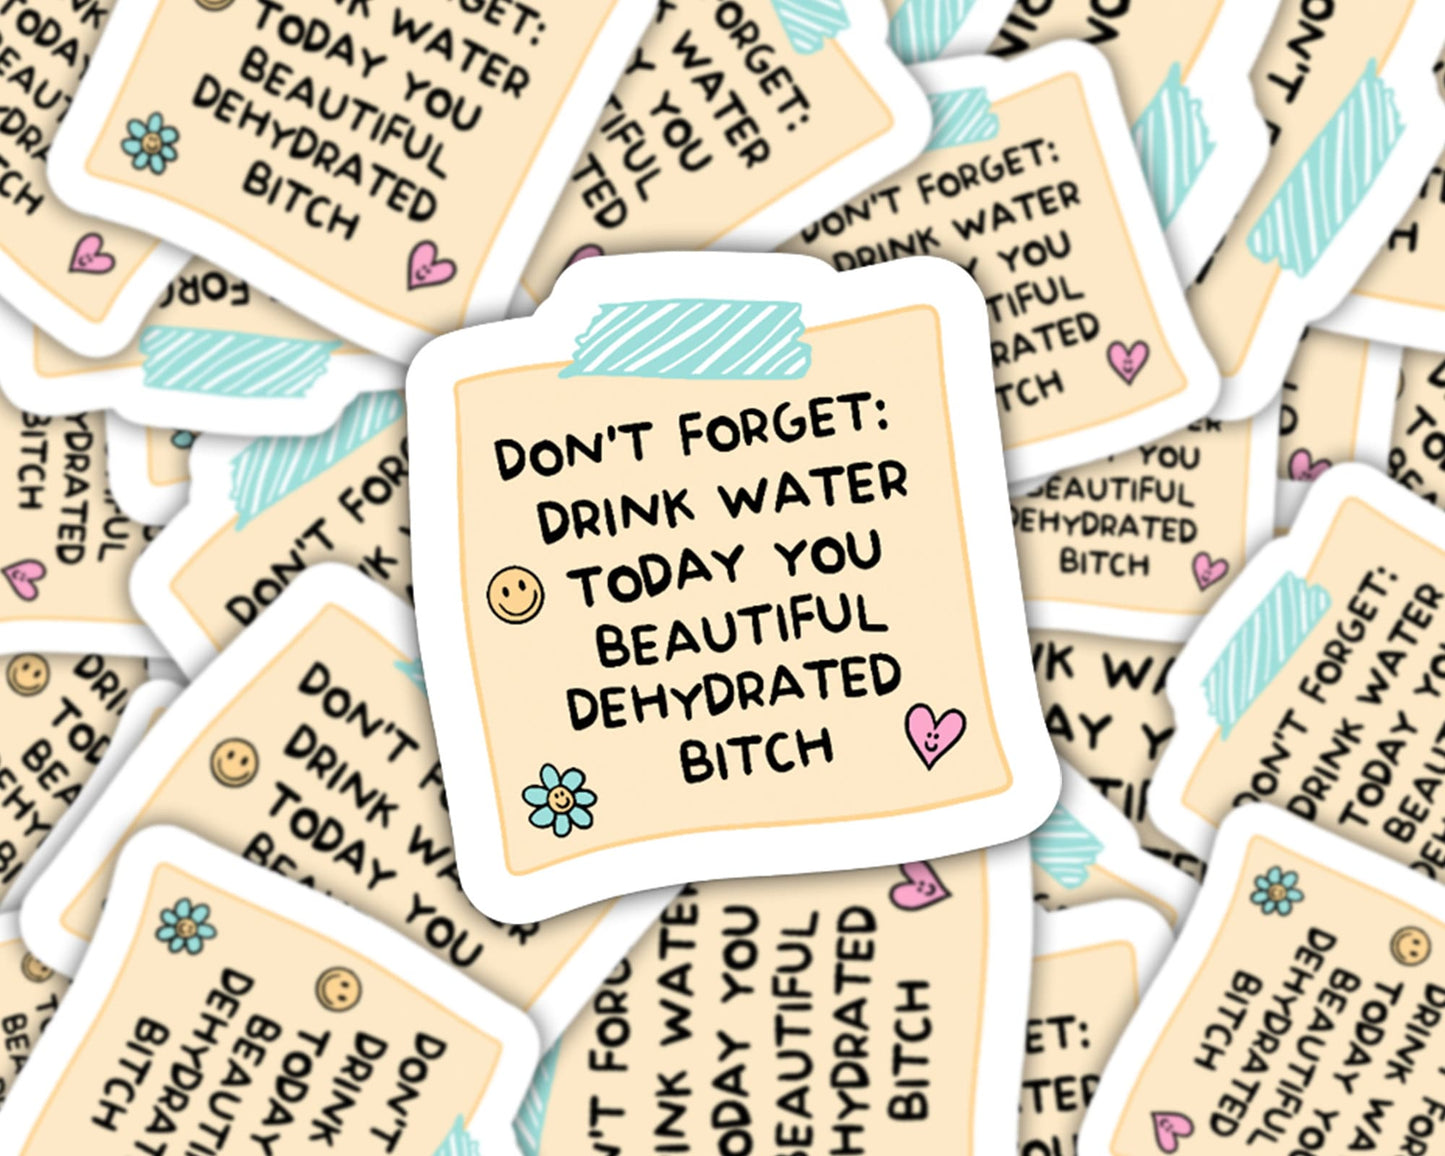 drink water sticker, drink water reminder, dehydrated bitch, water bottle stickers, daily to do list, gifts for friends, bitch stickers